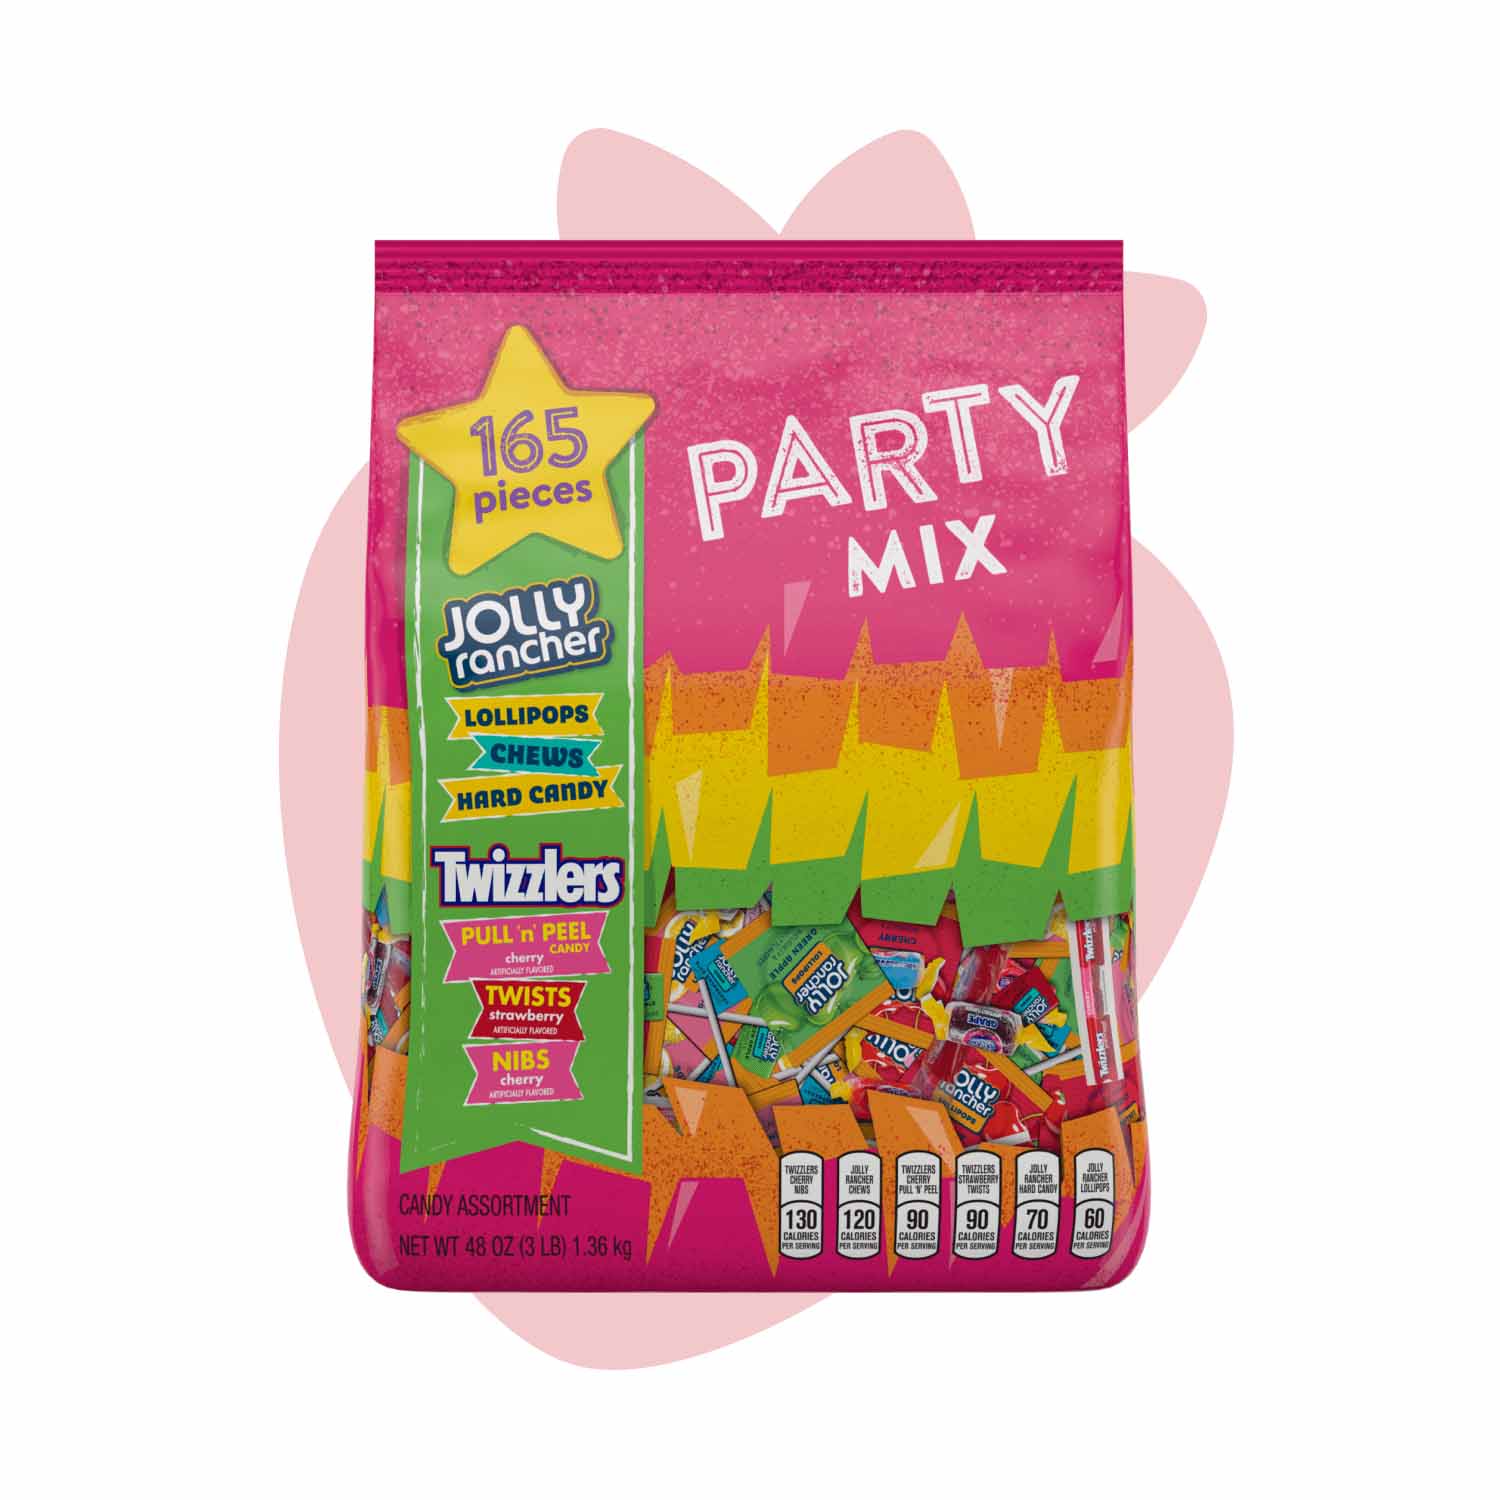 bag of twizzlers and jolly rancher party mix candy assortment